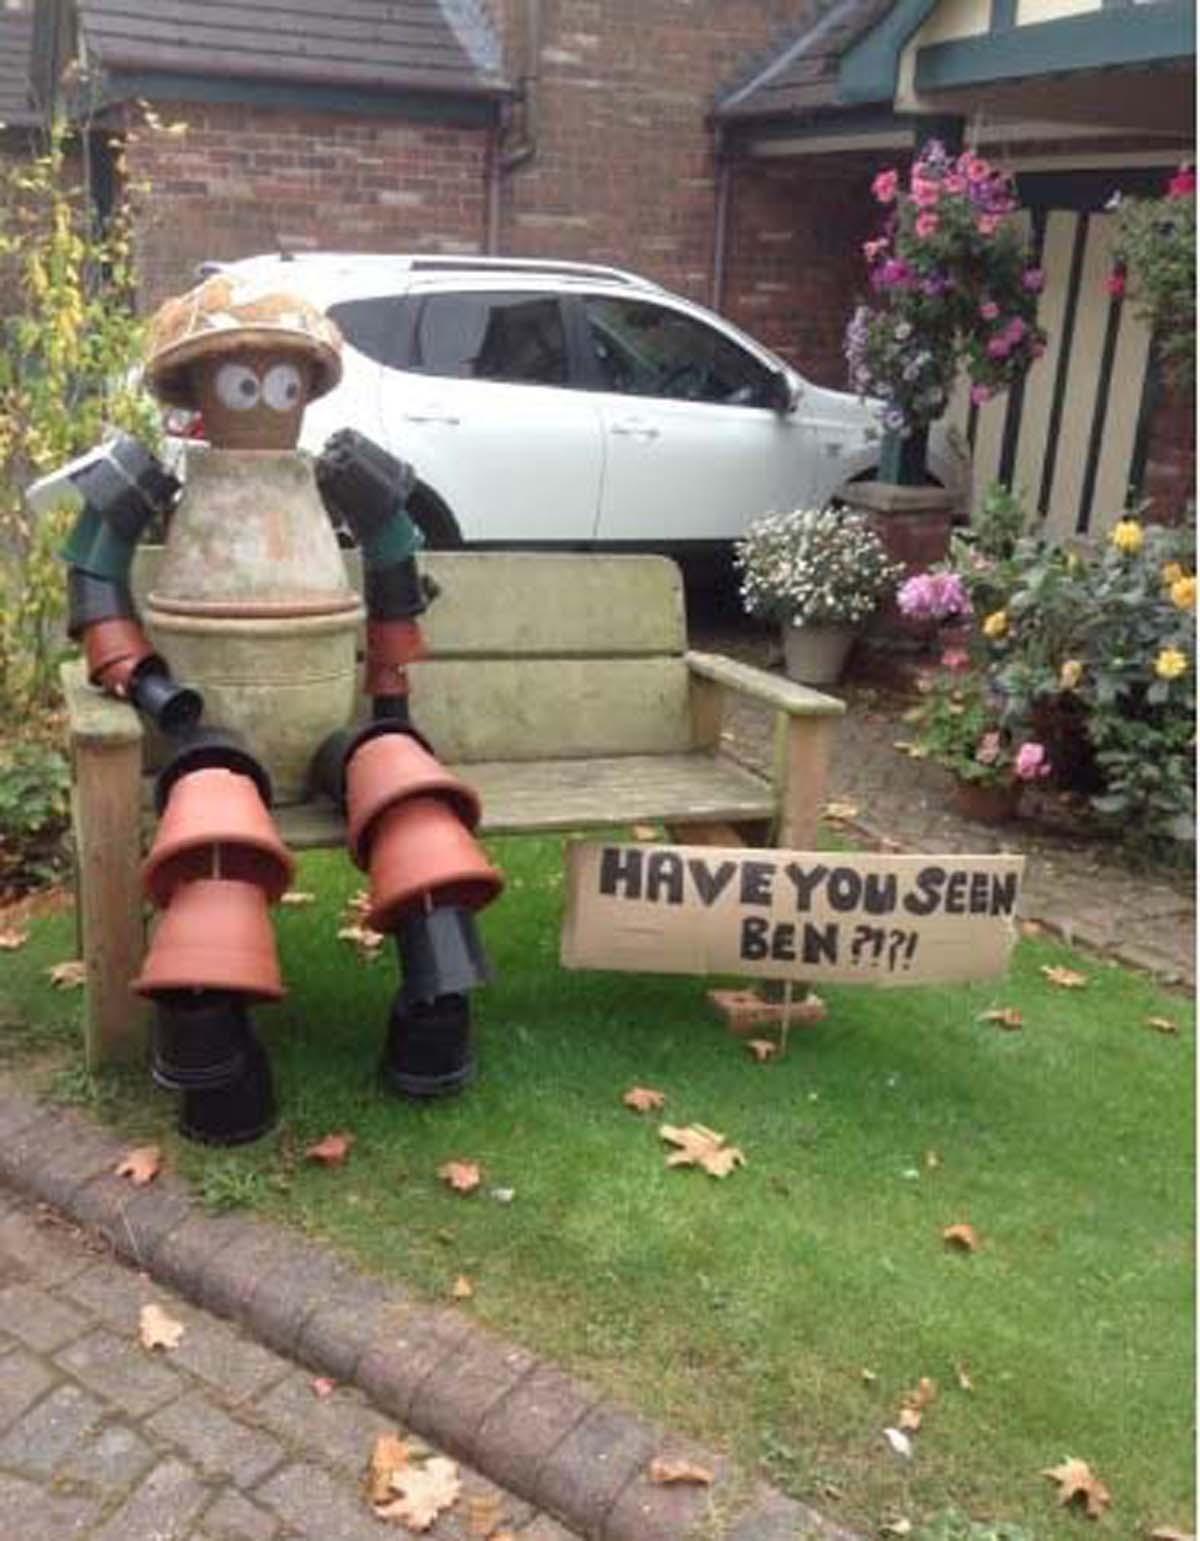 Mobberley Scarecrow Festival had plenty to crow about after it proved an outstanding hit for the second year running.